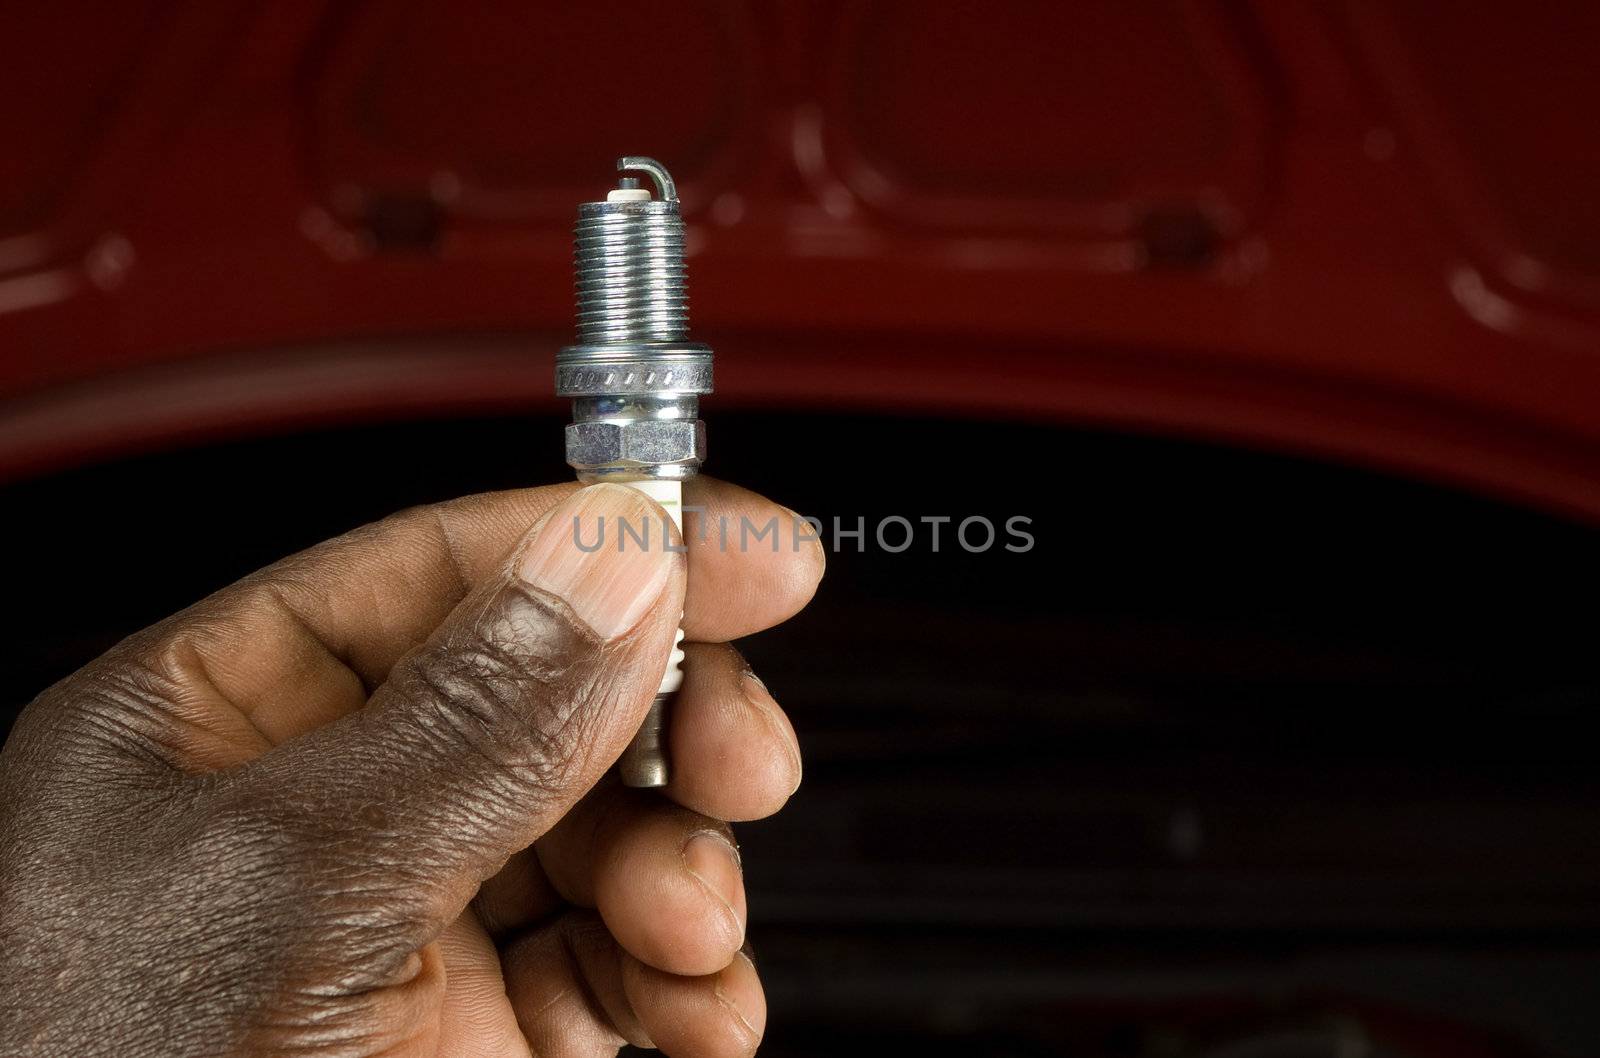 South African or American mechanic with spark plug and engine maintenance repair car background